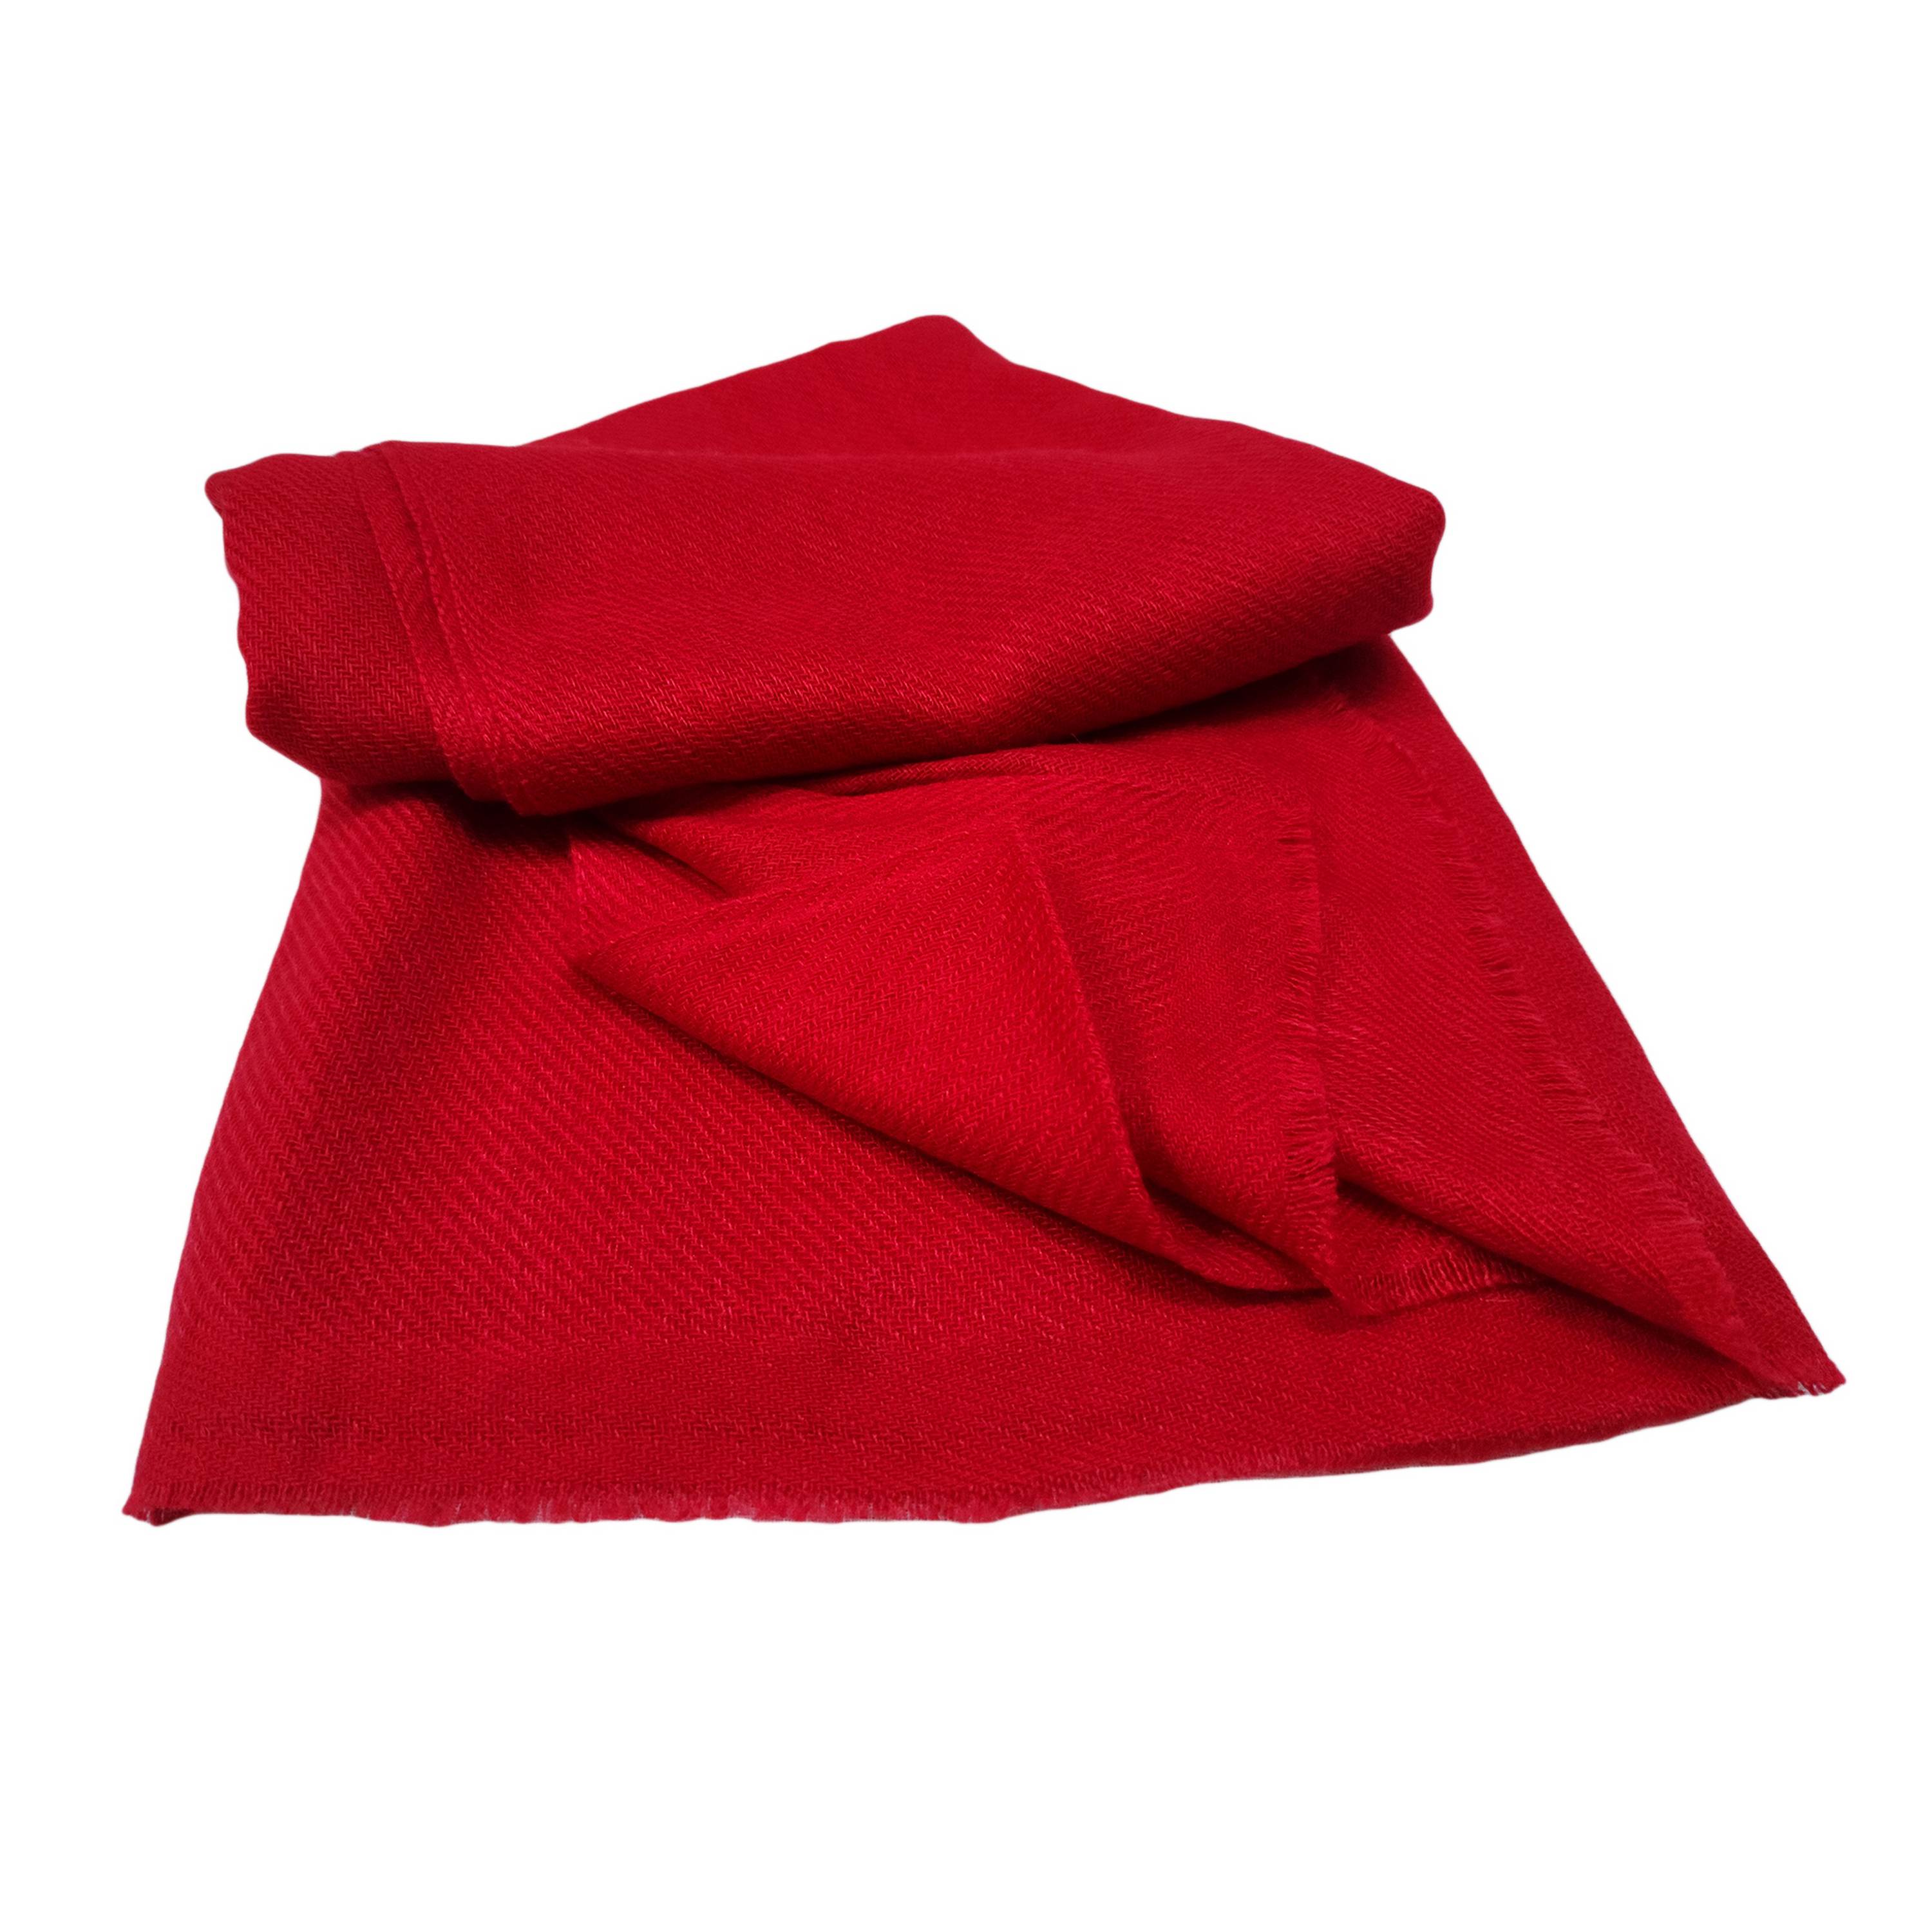 Pashmina Shawl, red Colour Dye, With Four-ply Wool